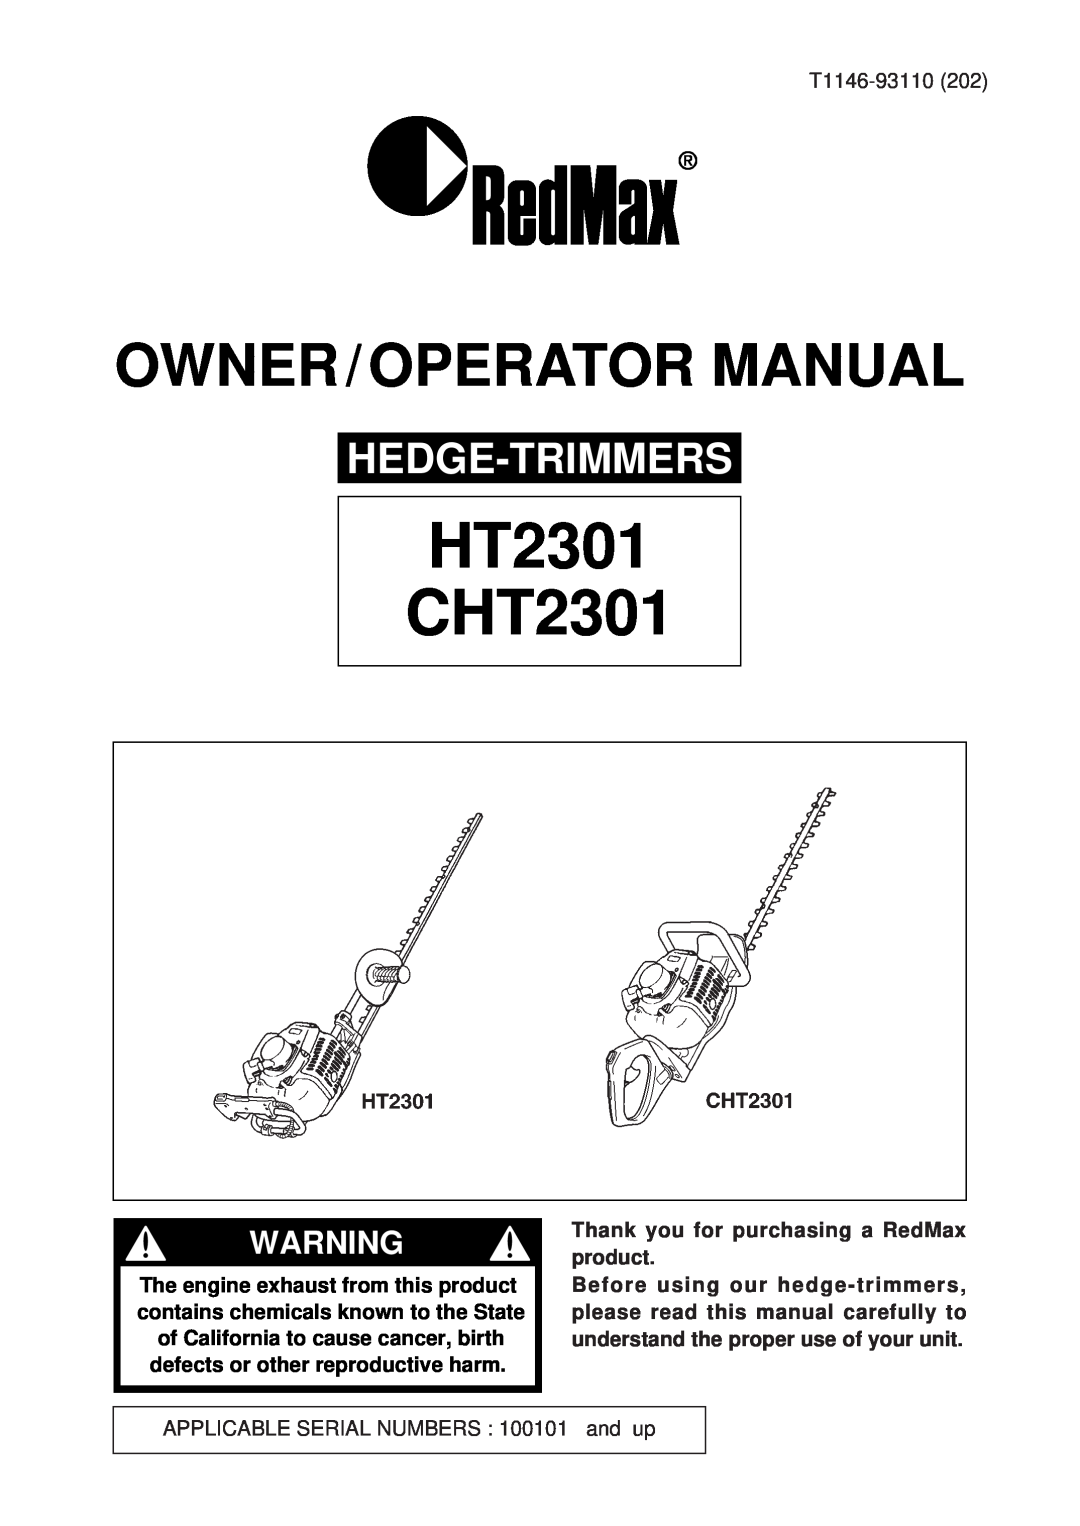 RedMax manual HT2301 CHT2301, Hedge-Trimmers, Owner / Operator Manual 